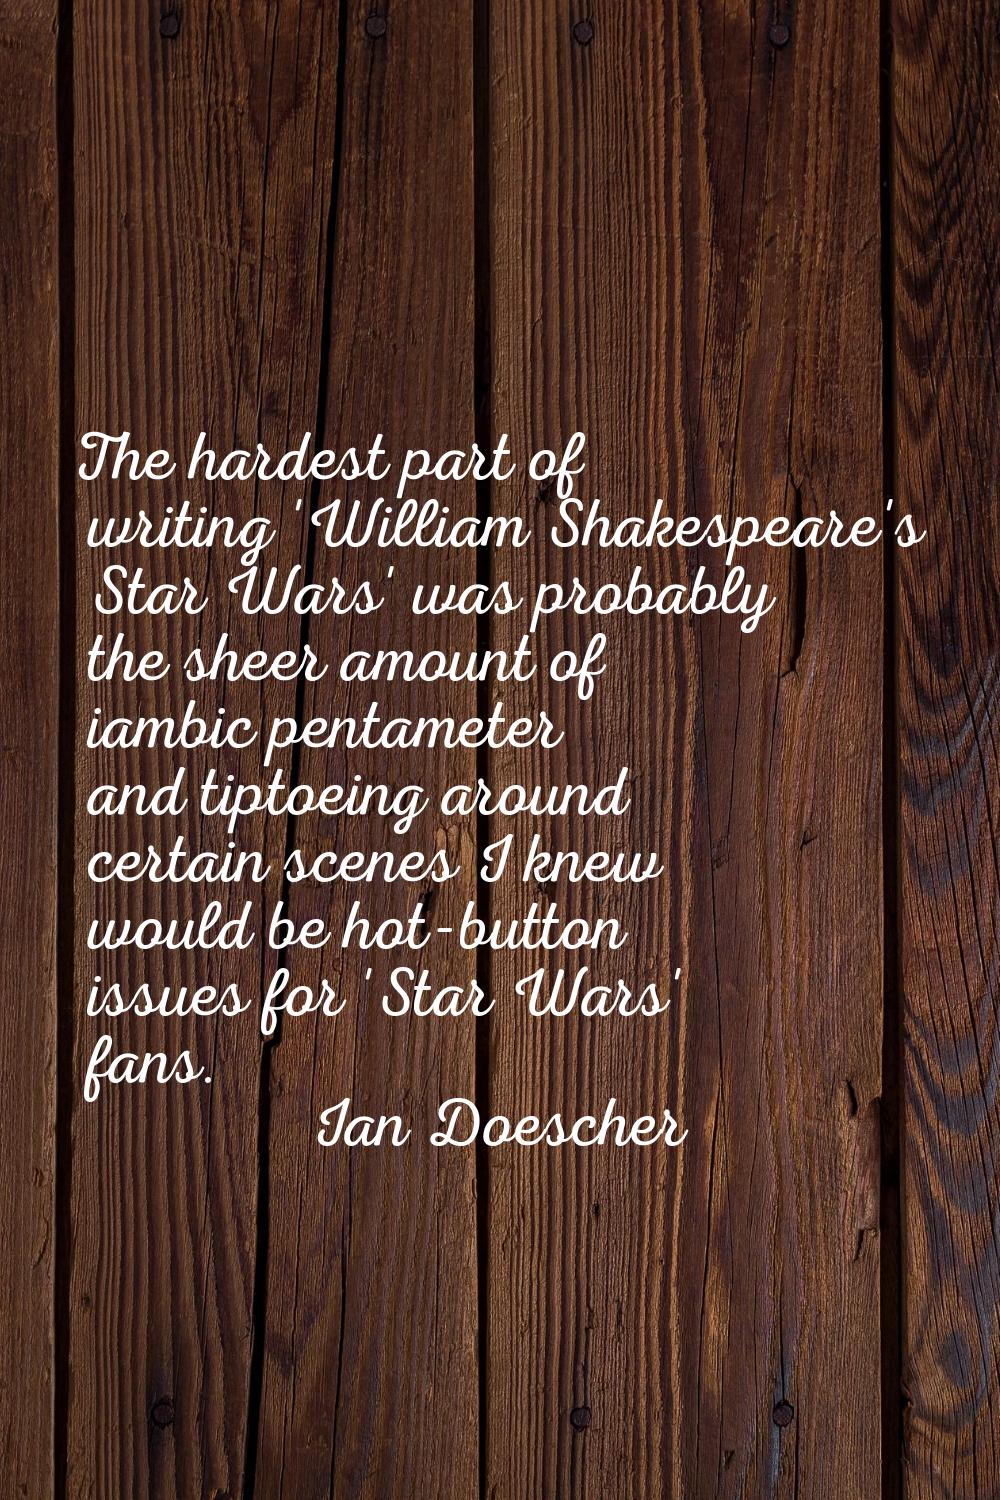 The hardest part of writing 'William Shakespeare's Star Wars' was probably the sheer amount of iamb